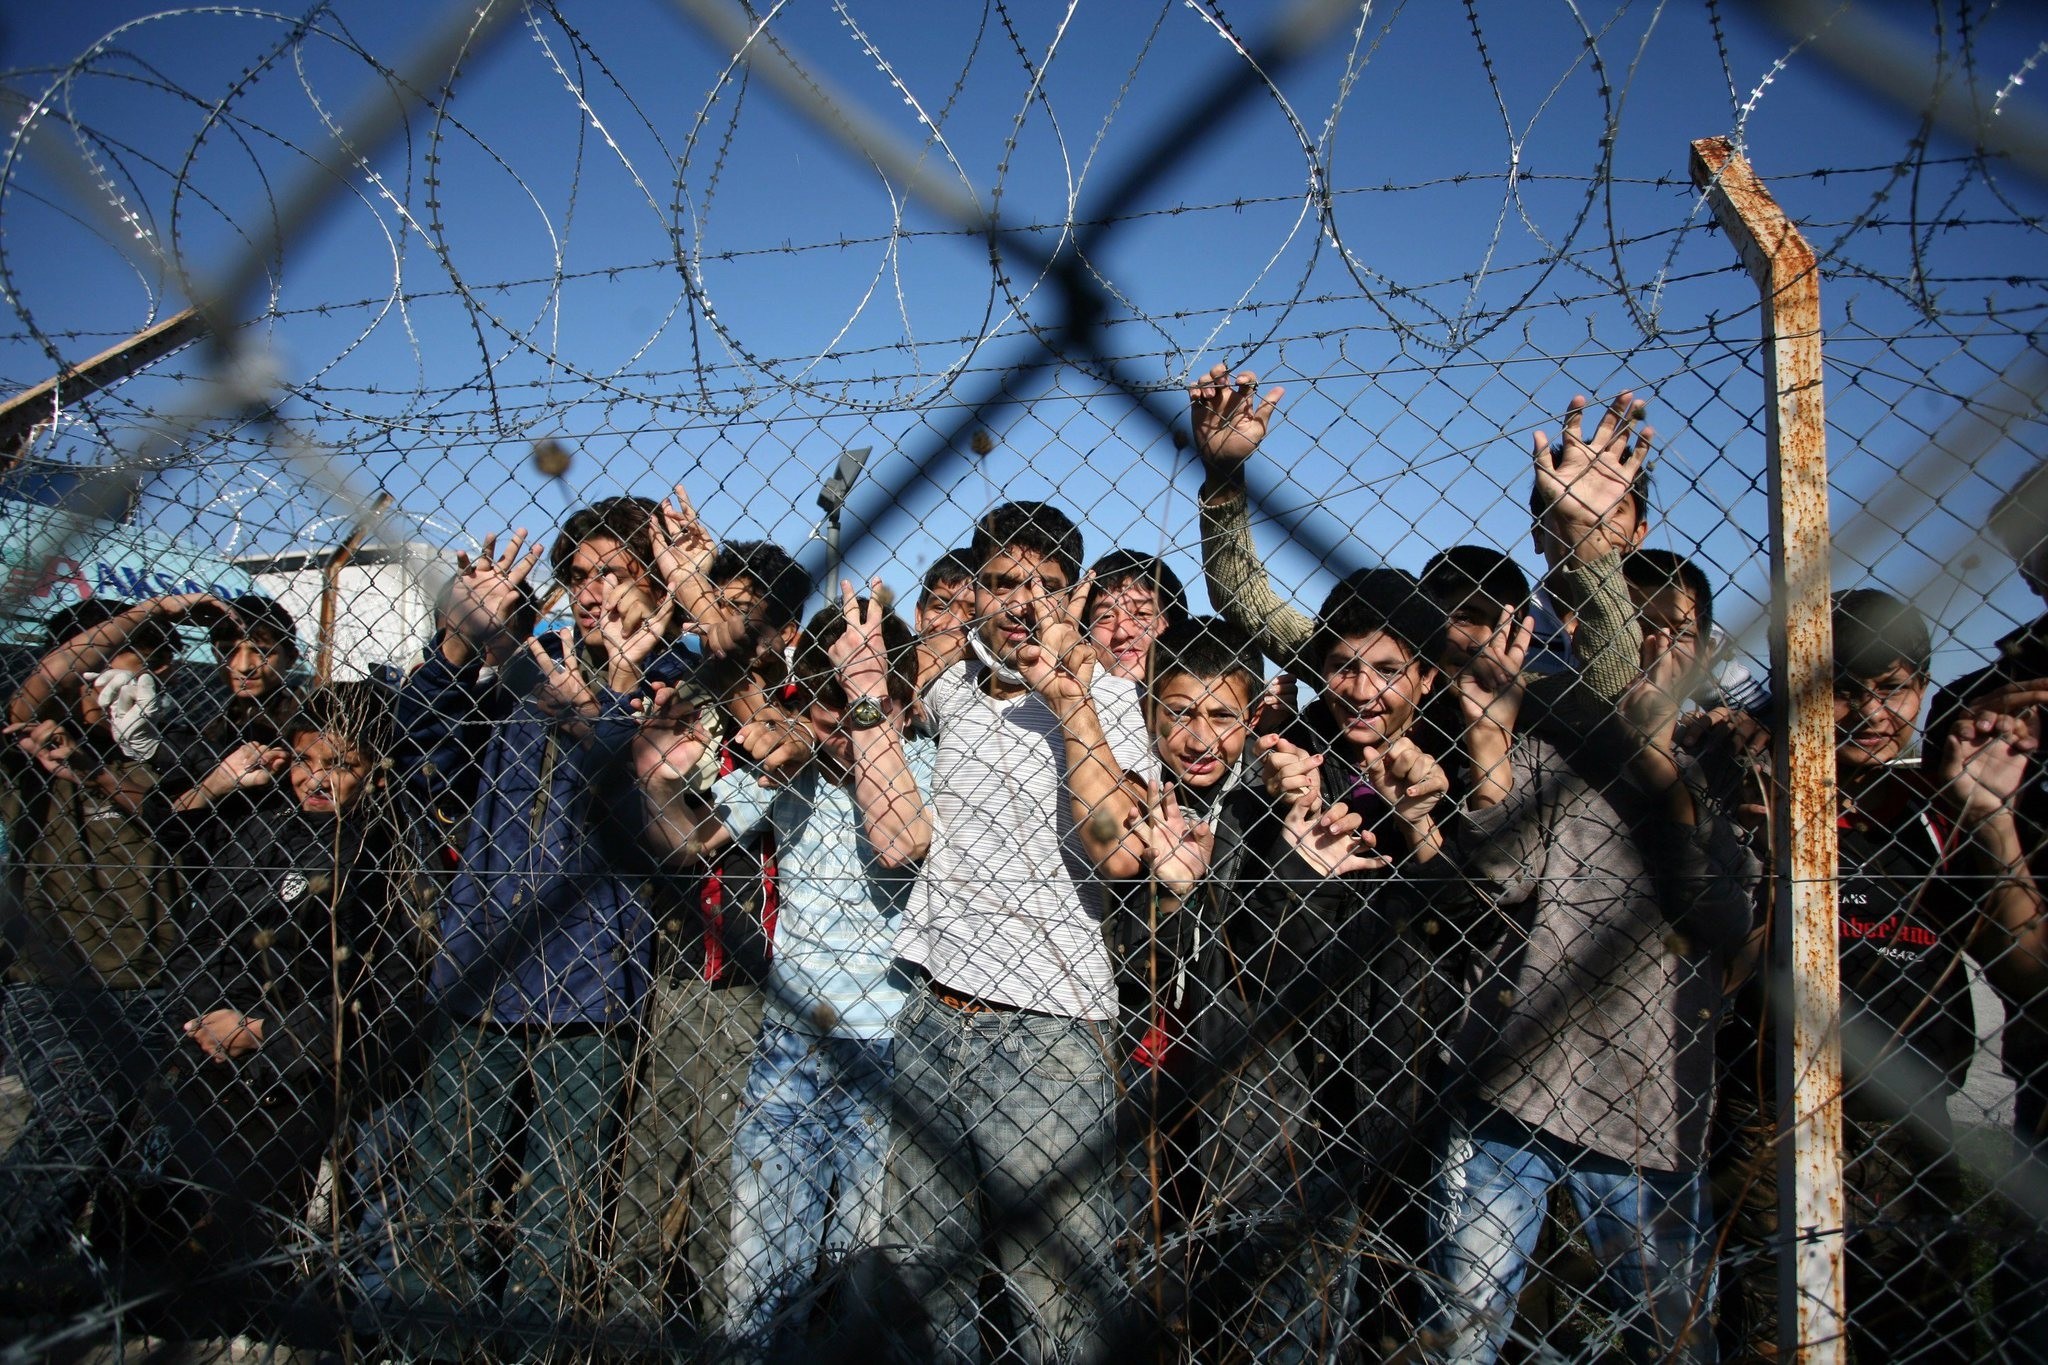 Immigrant minors peer out through the fence of an immigrant detention center in the village of Filakio, on the Greek-Turkish border. (AFP Photo)